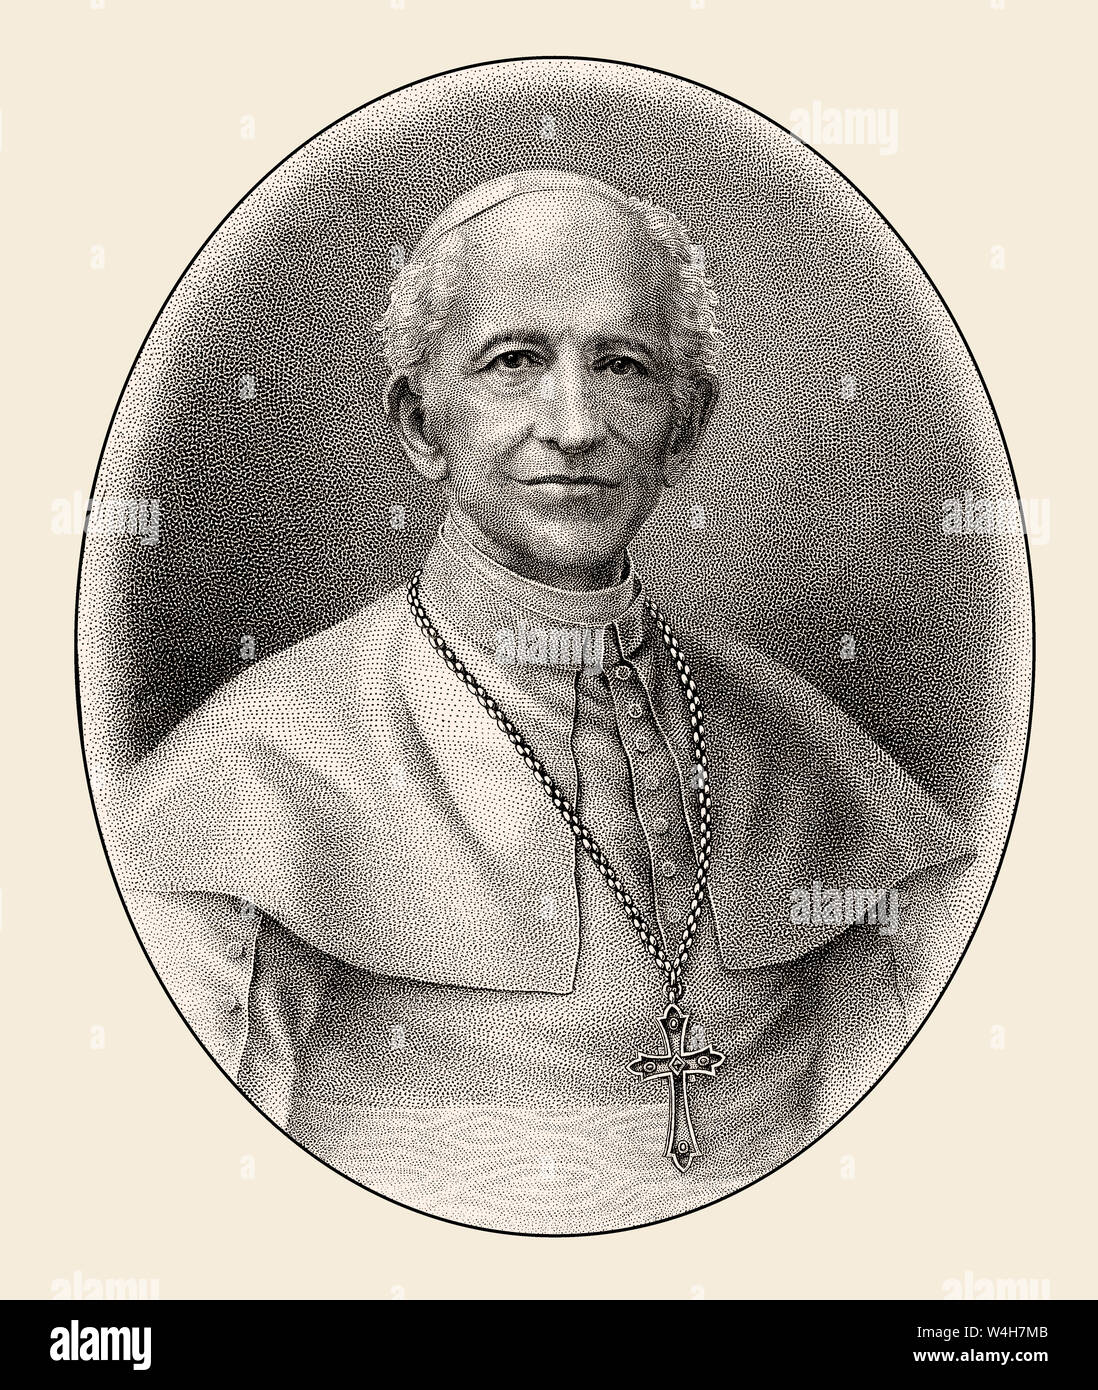 Leo XIII, was Pope from 1878 - 1903 Stock Photo